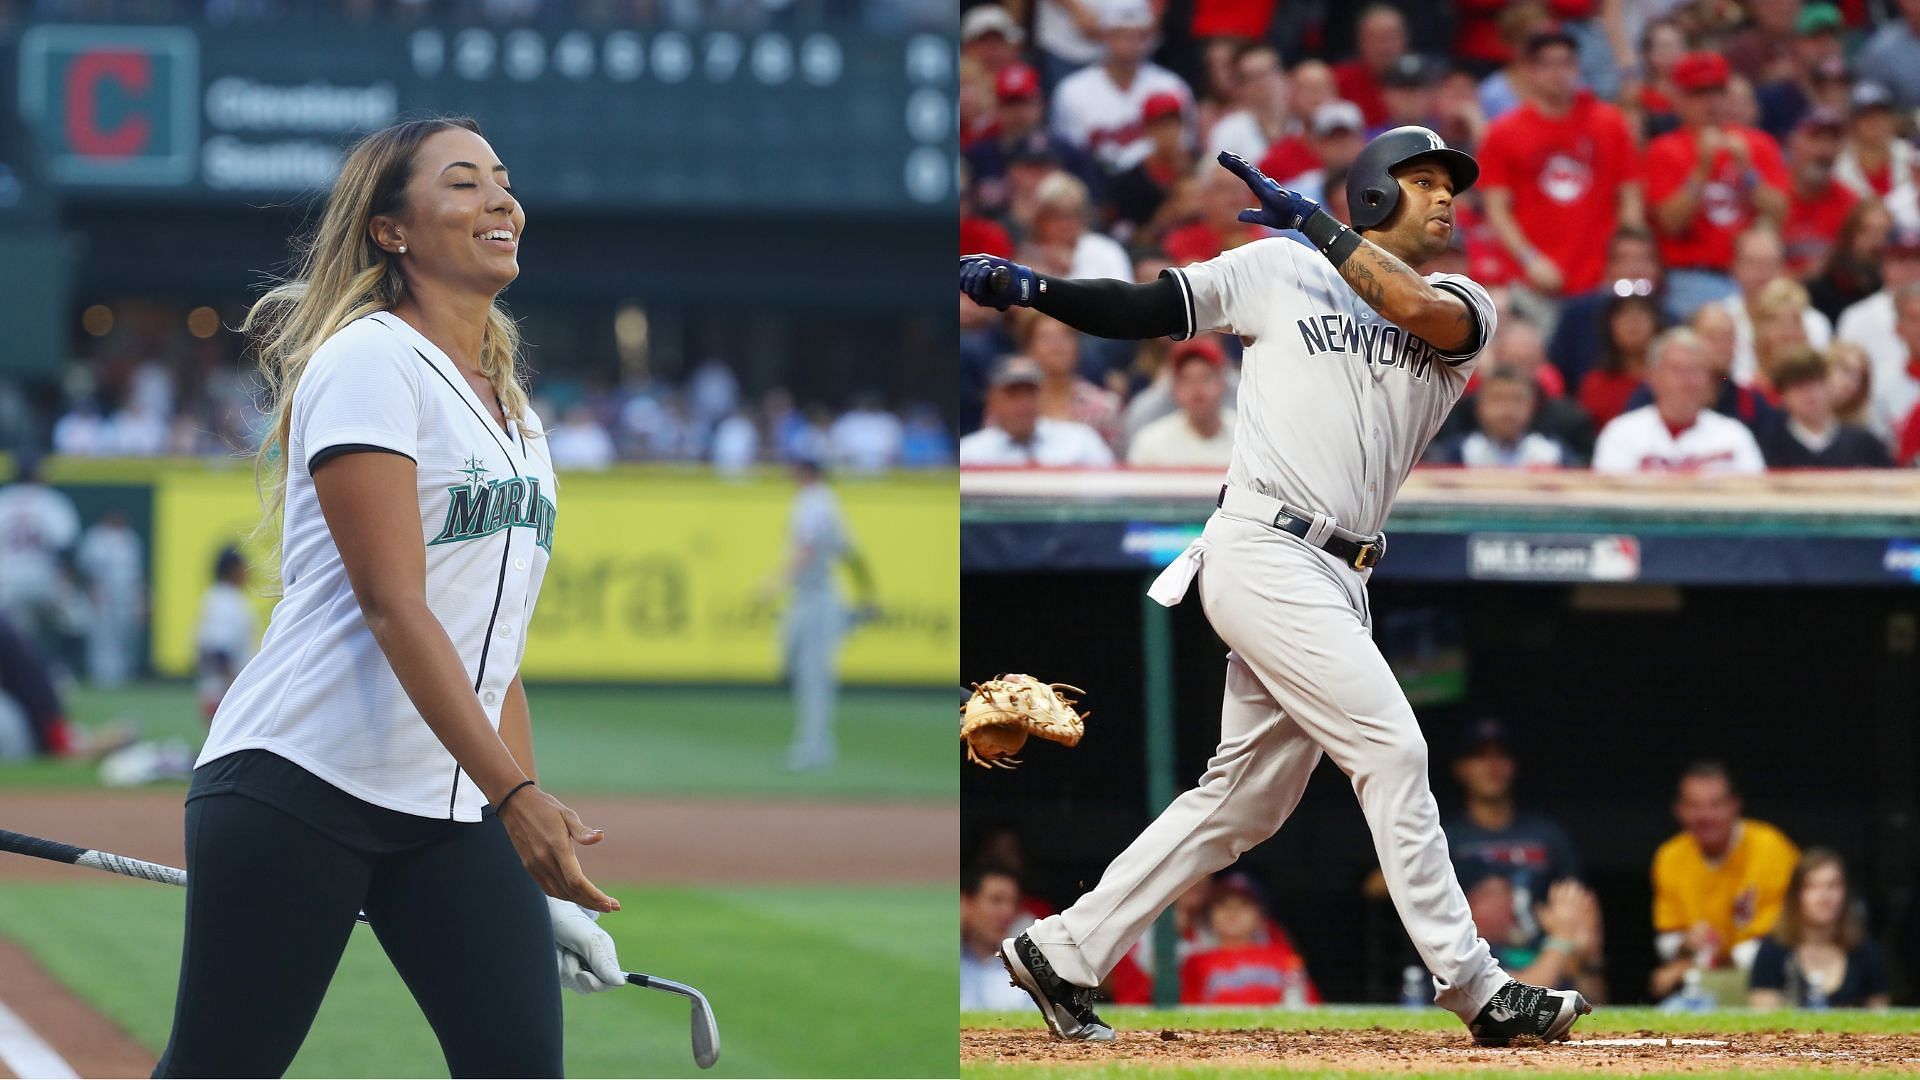 “Love seeing that smile”: Cheyenne Woods 'proud' of husband Aaron Hicks'  'new chapter